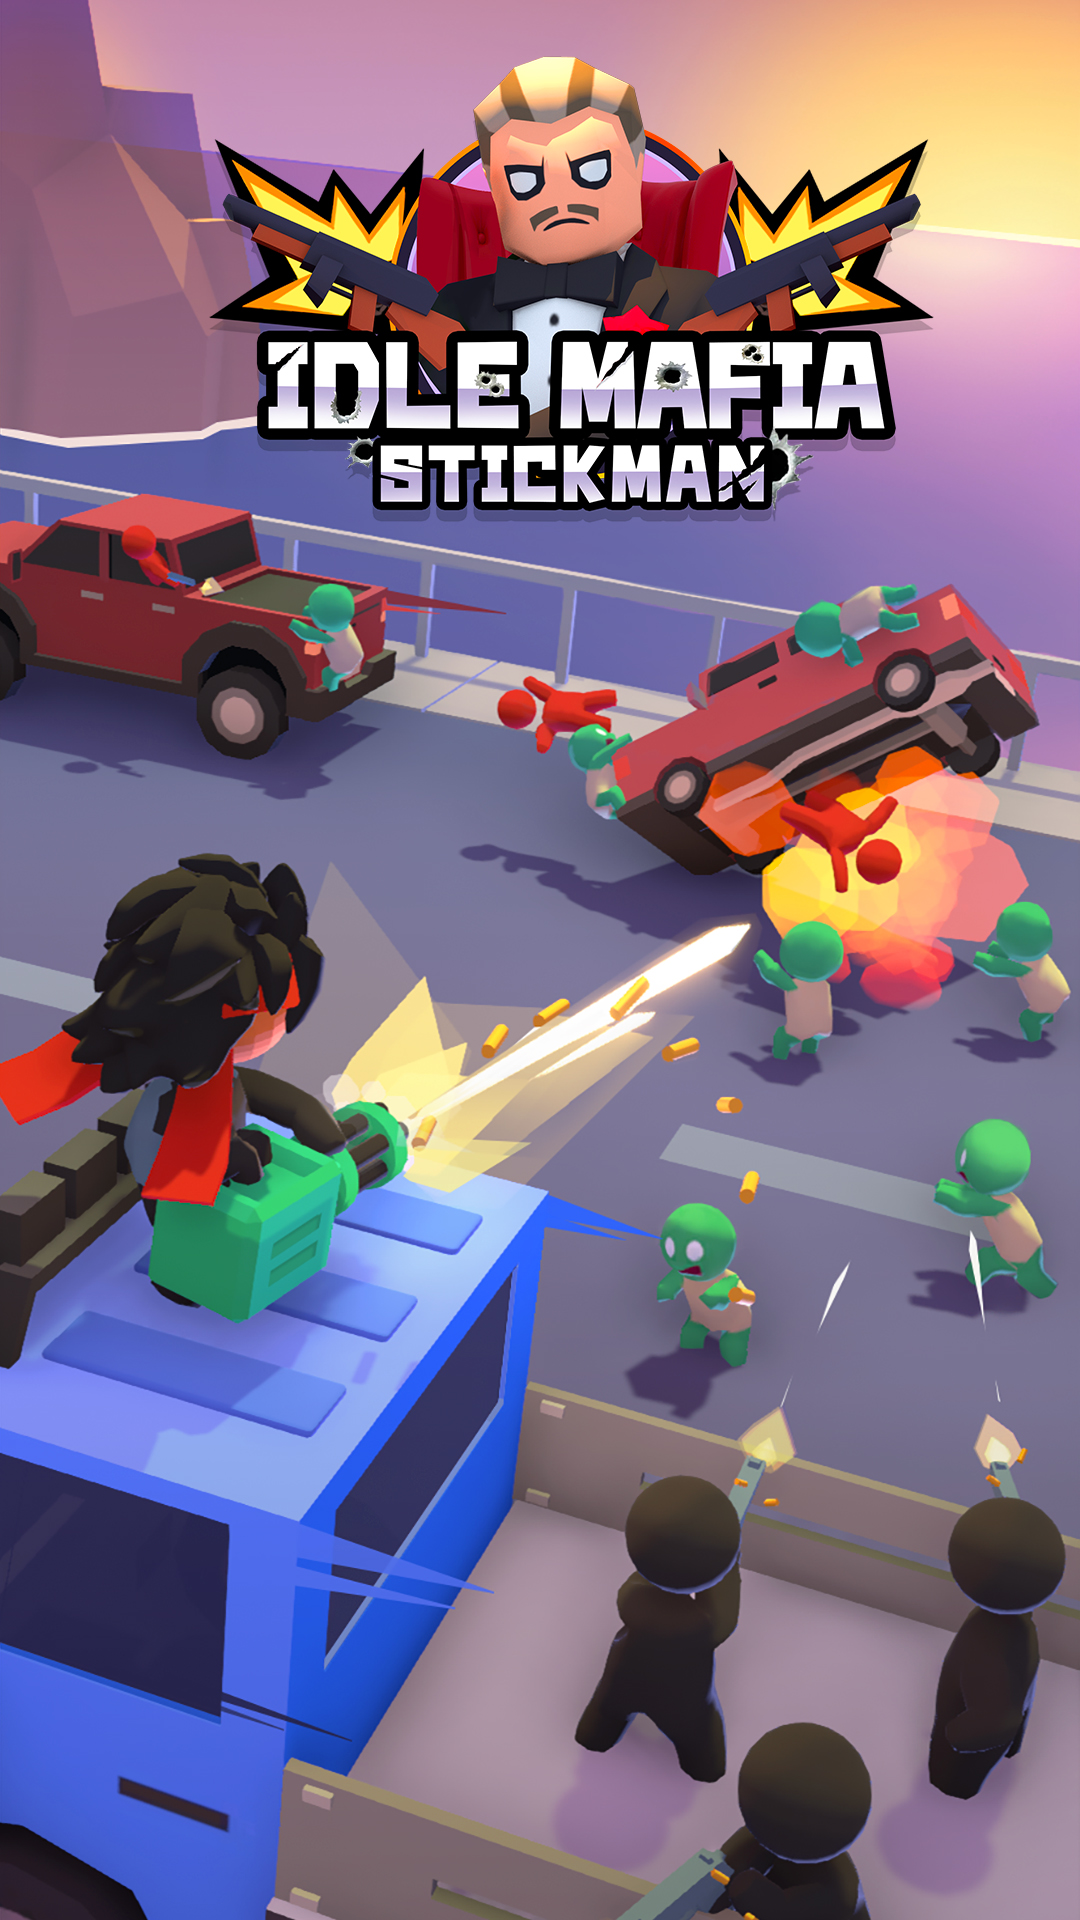 Full version of Android Arcade game apk Stickman: Idle Mafia for tablet and phone.